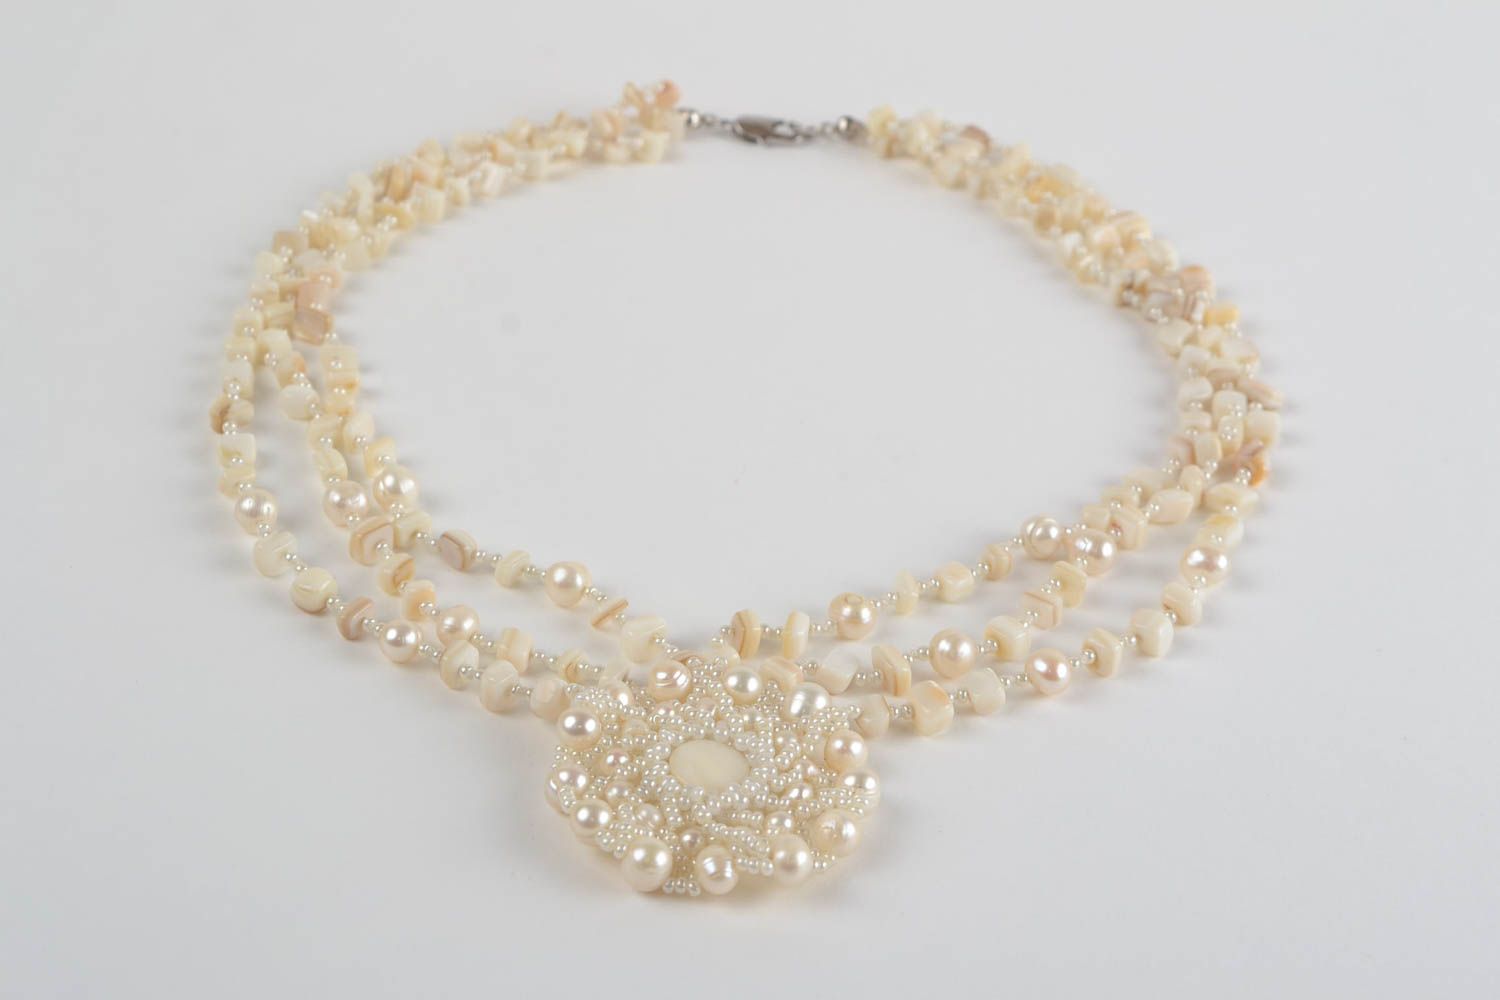 Beautiful gentle handmade necklace woven of beads and natural stone photo 2